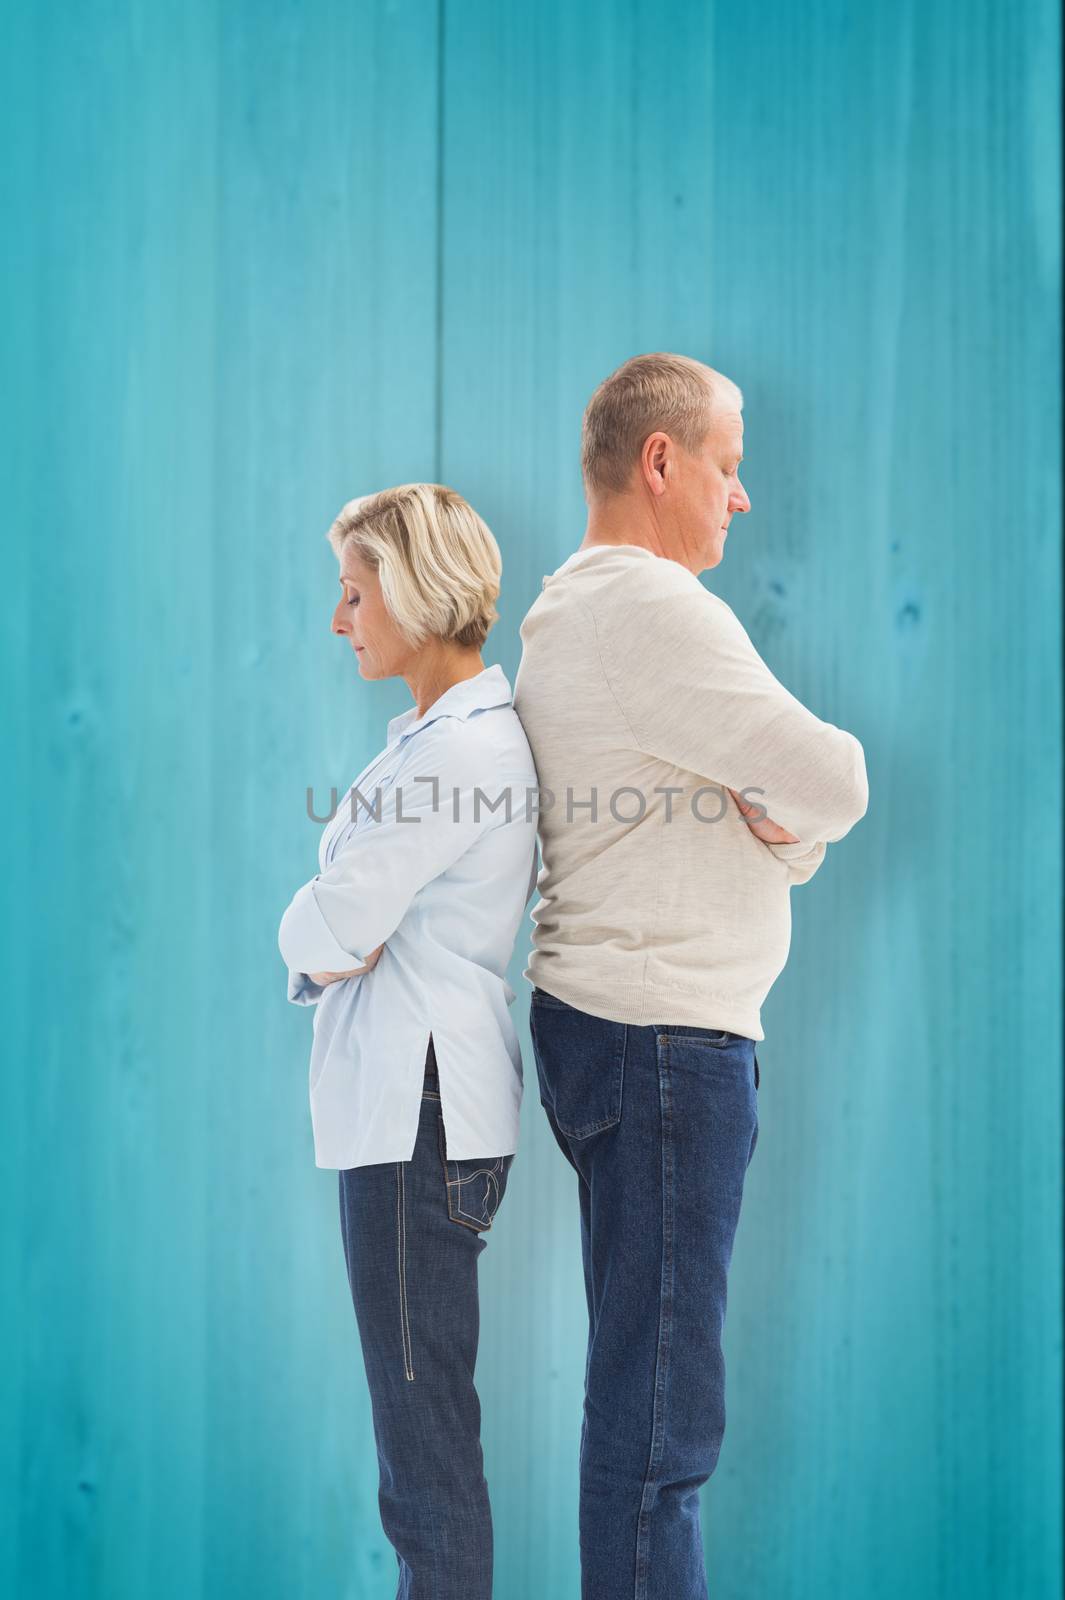 Unhappy couple not speaking to each other  against wooden planks background